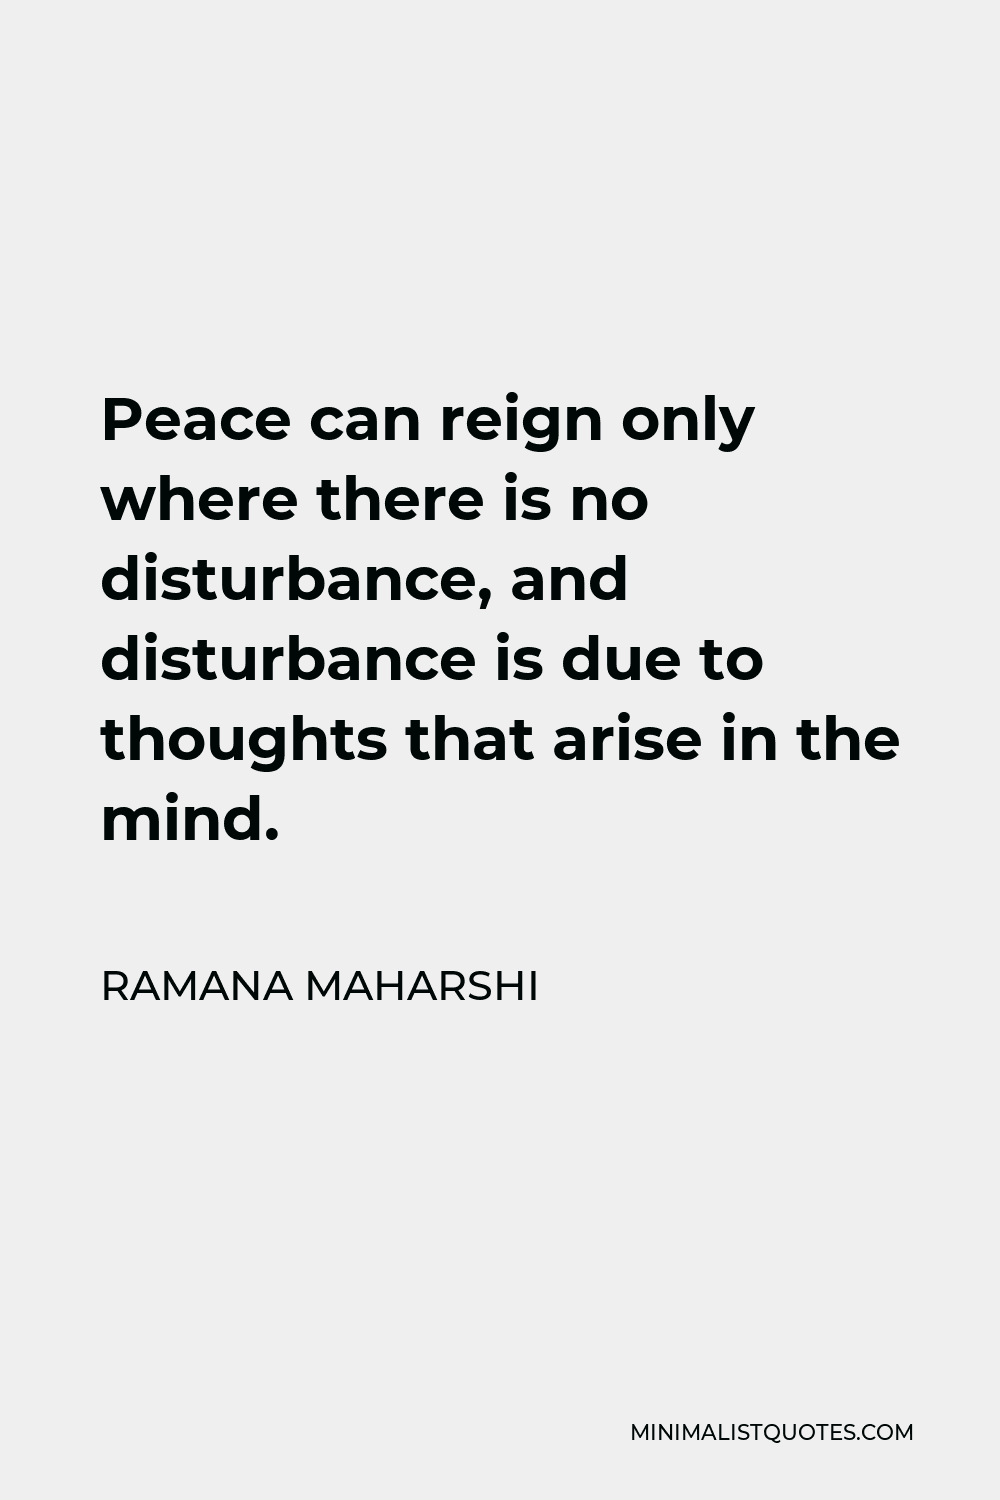 Ramana Maharshi Quote - Peace can reign only where there is no disturbance, and disturbance is due to thoughts that arise in the mind.